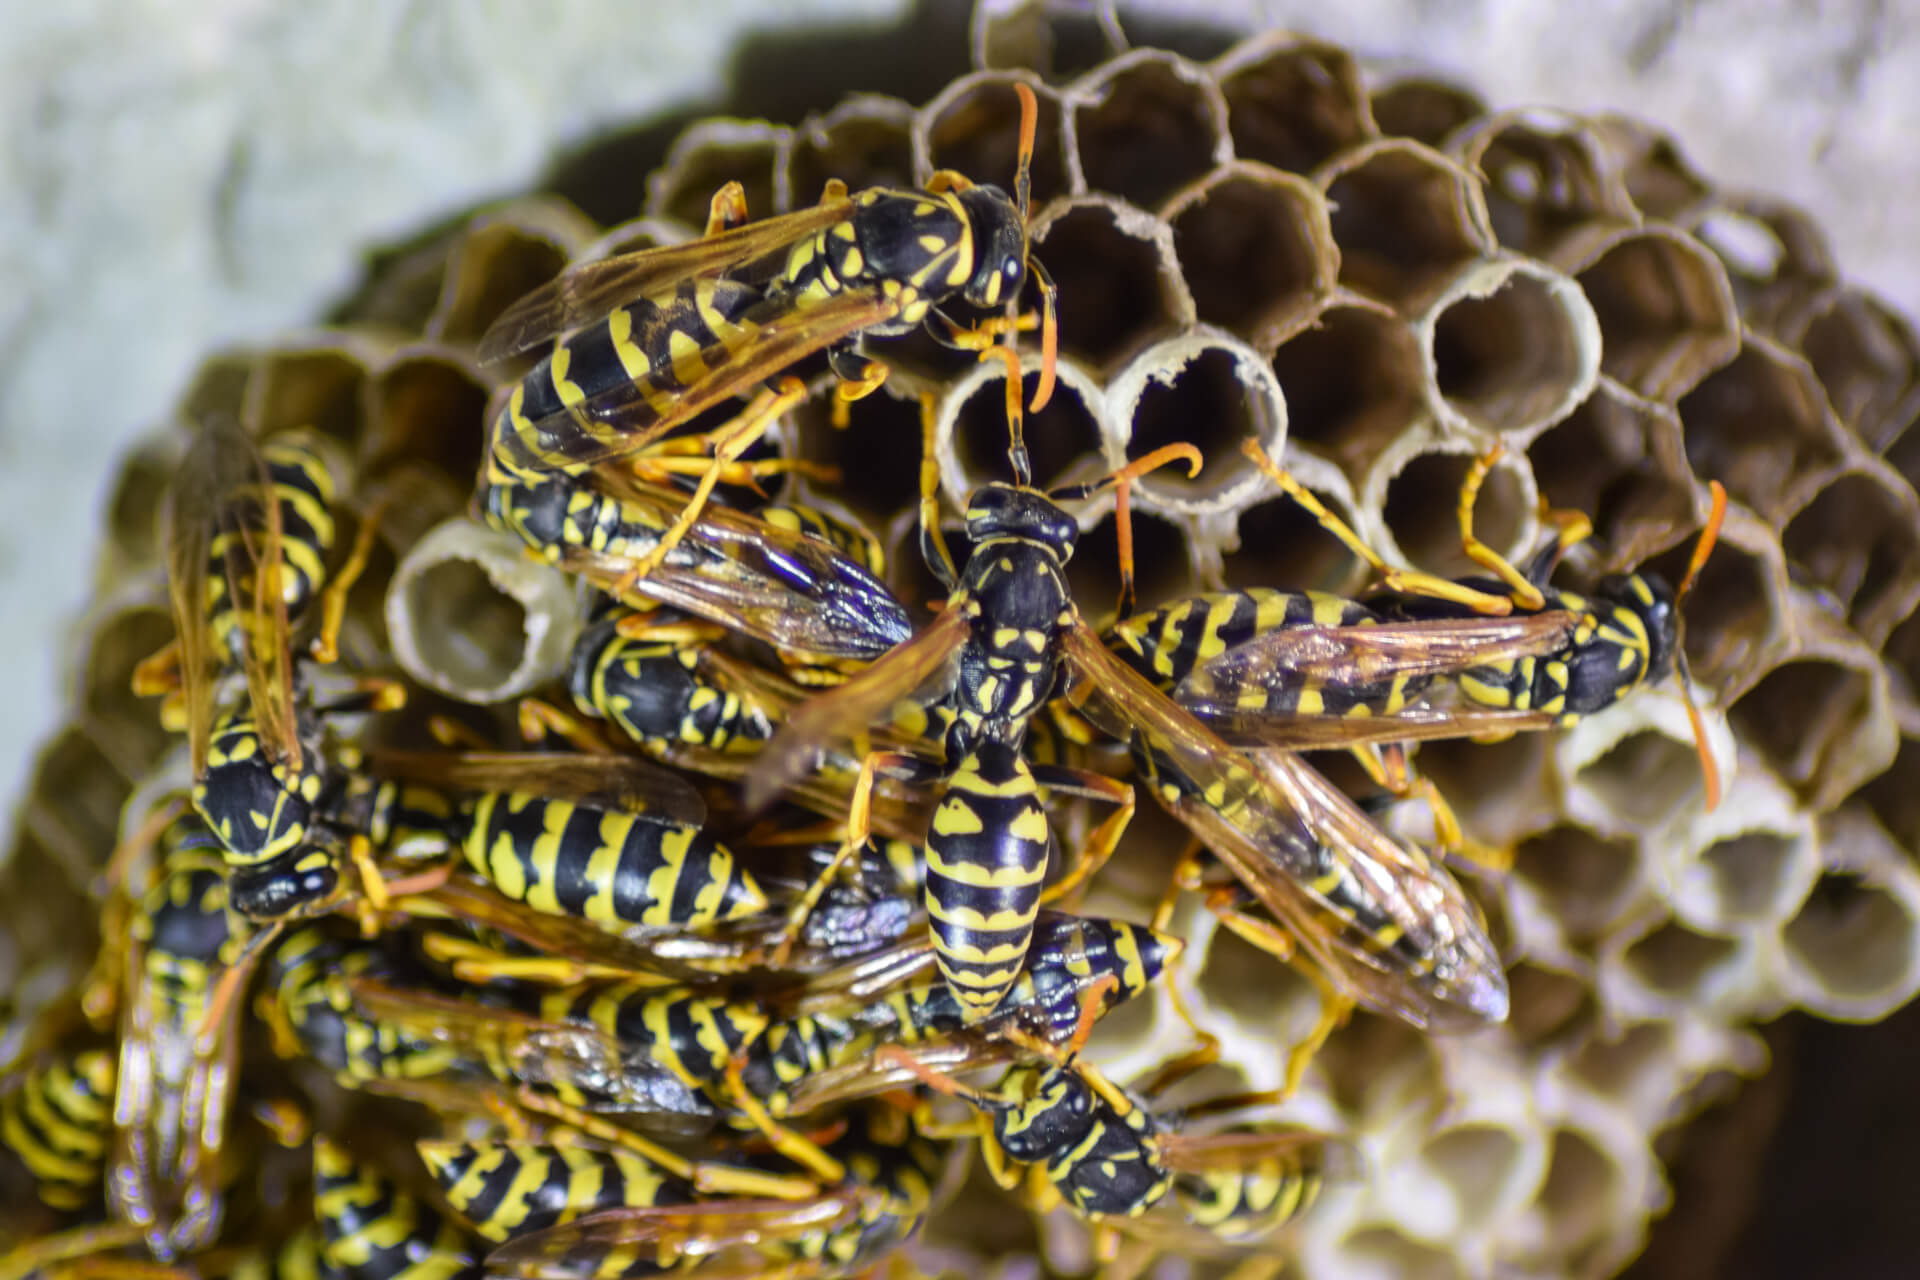 What is the best repellent for wasps?